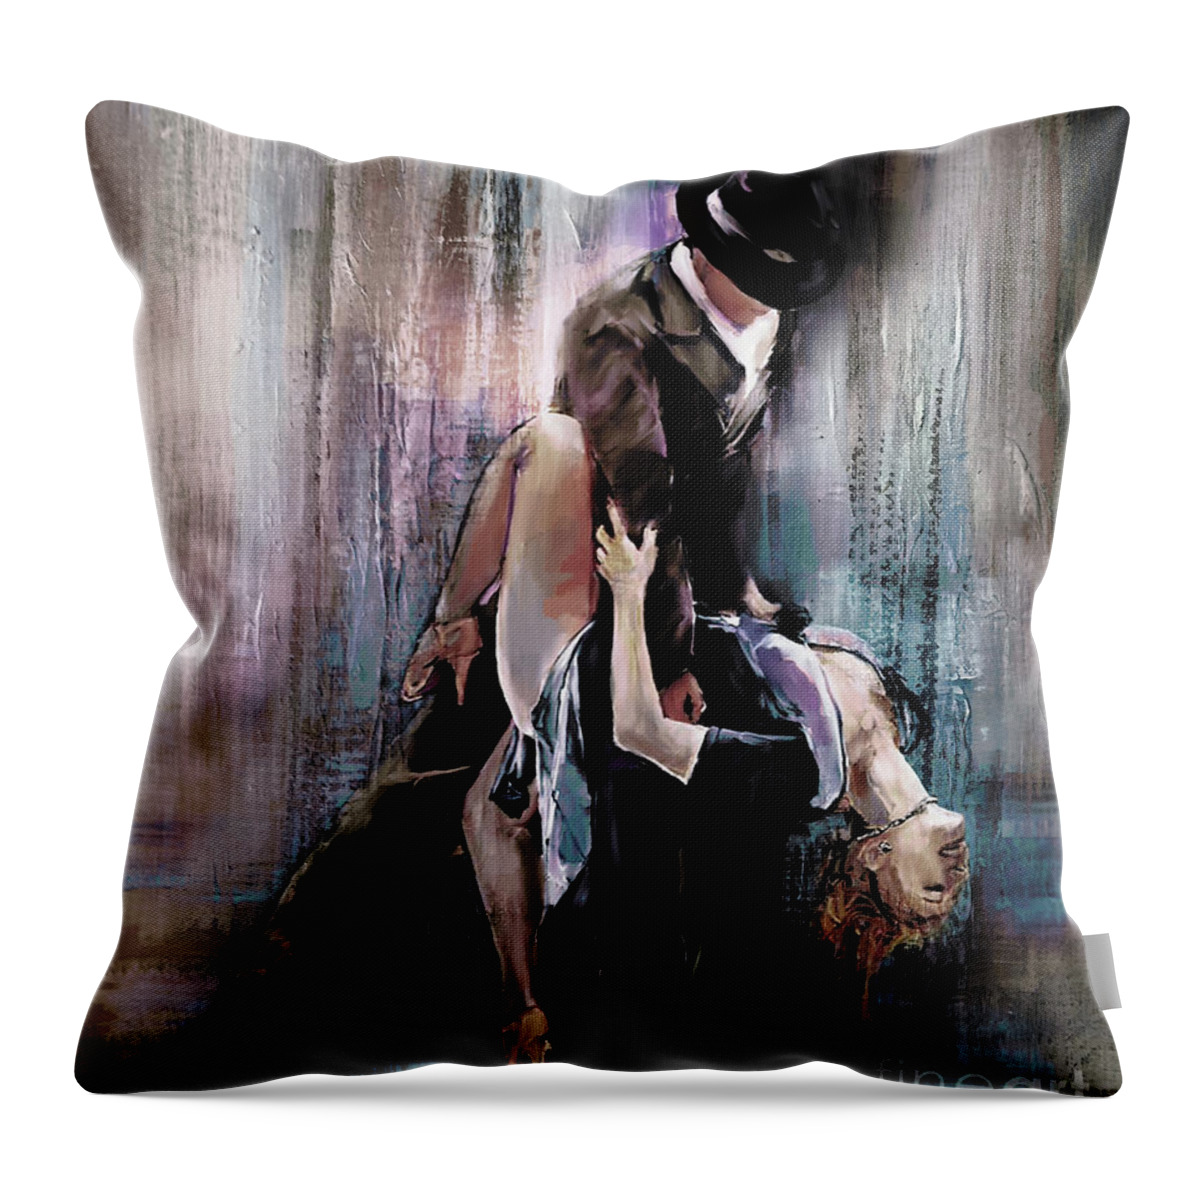 Dance Throw Pillow featuring the painting Tango Couple 05 by Gull G